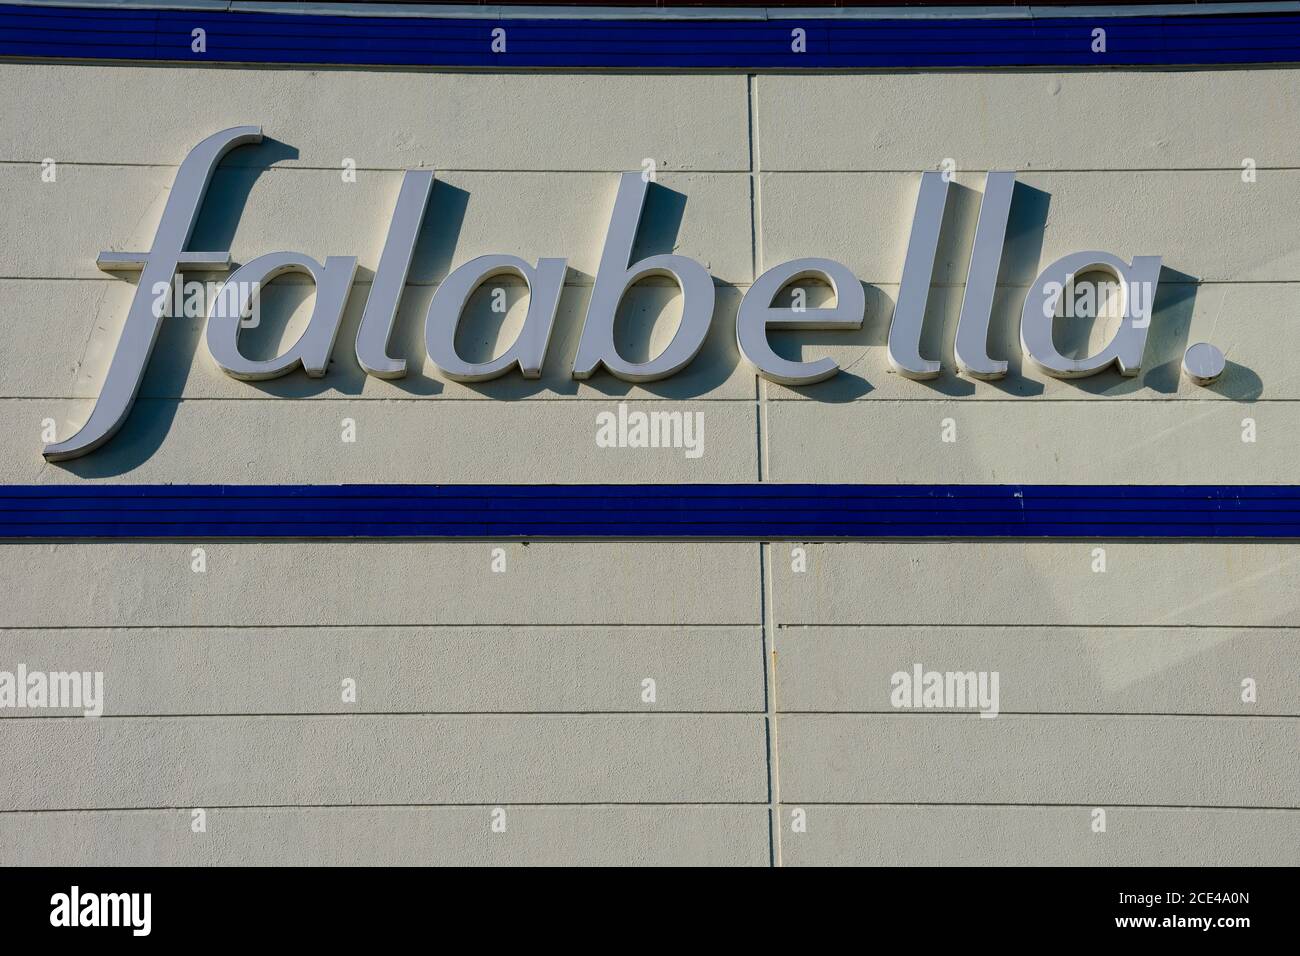 Puerto Montt, Chile. February 12, 2020. Falabella sign, a multinational chain of department stores. Paseo Costanera Mall Stock Photo